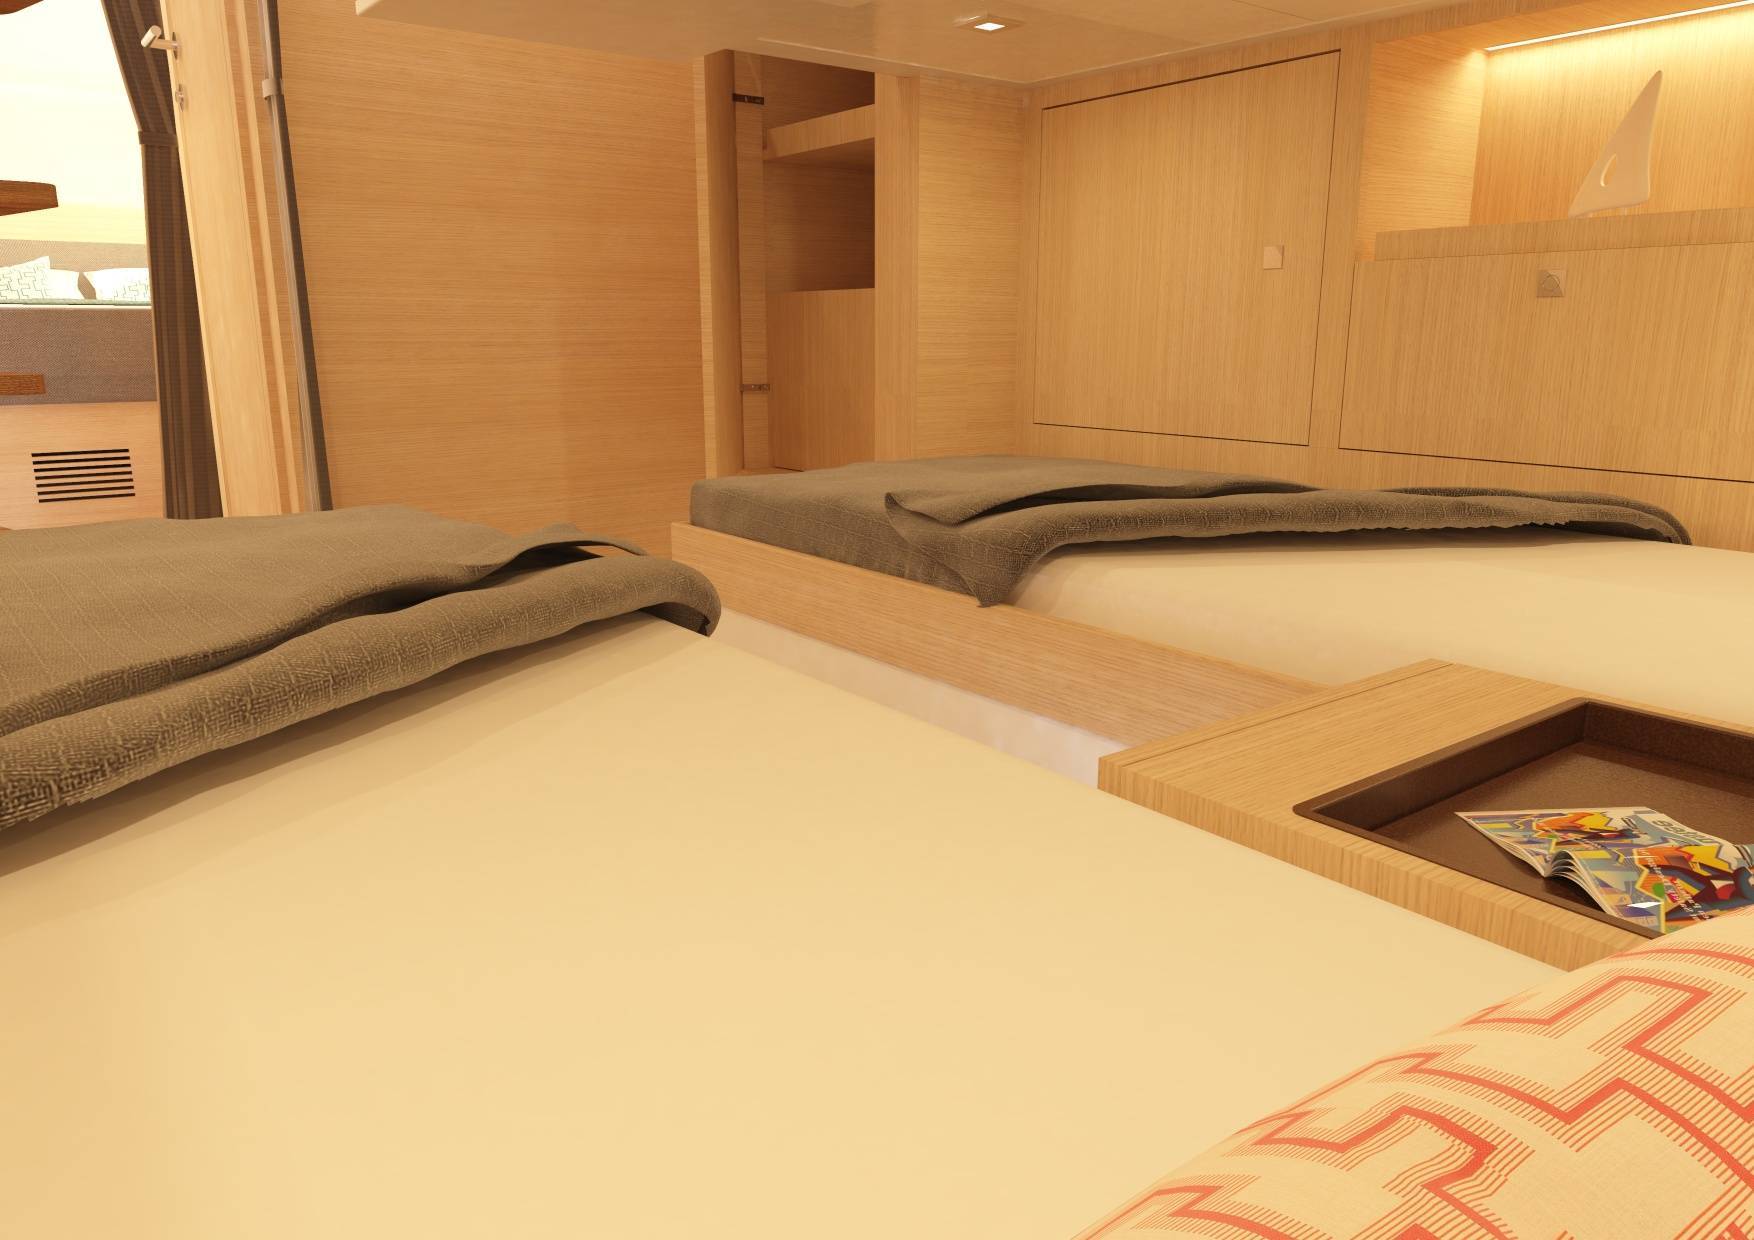 The D38 CC also features a further two beds